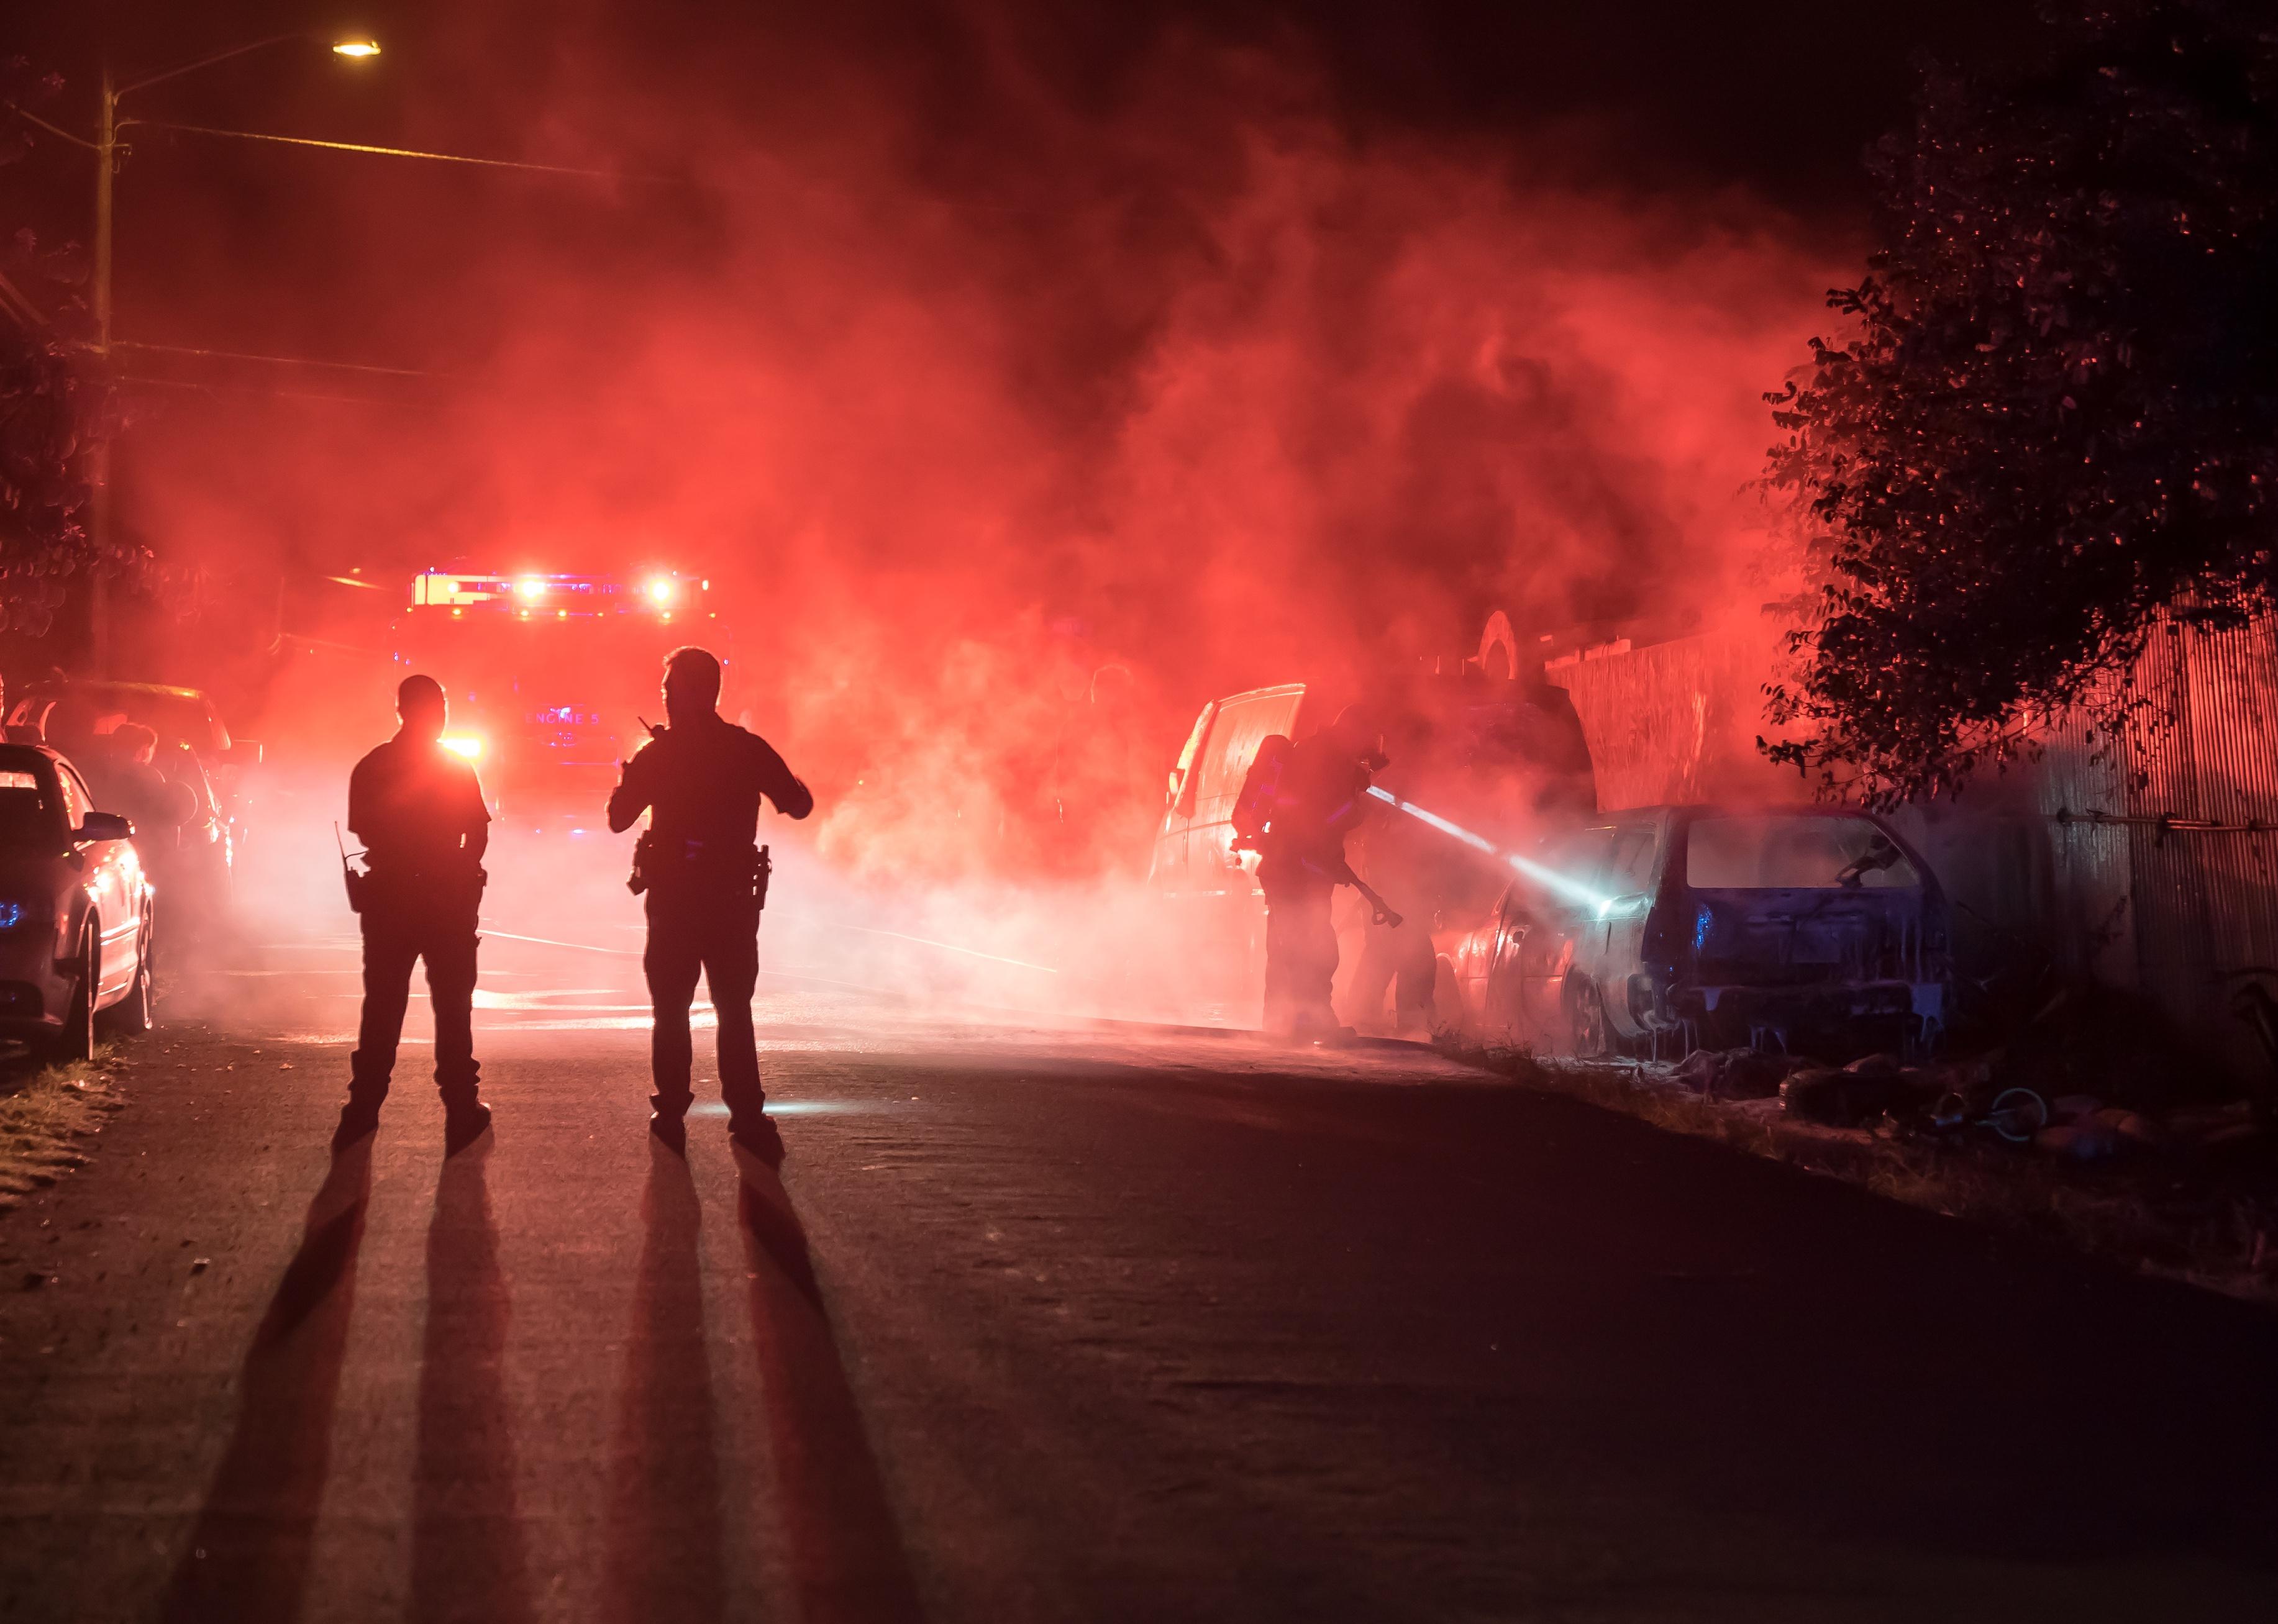 Firefighters and police officers extinguish a vehicle fire in the middle of the night.